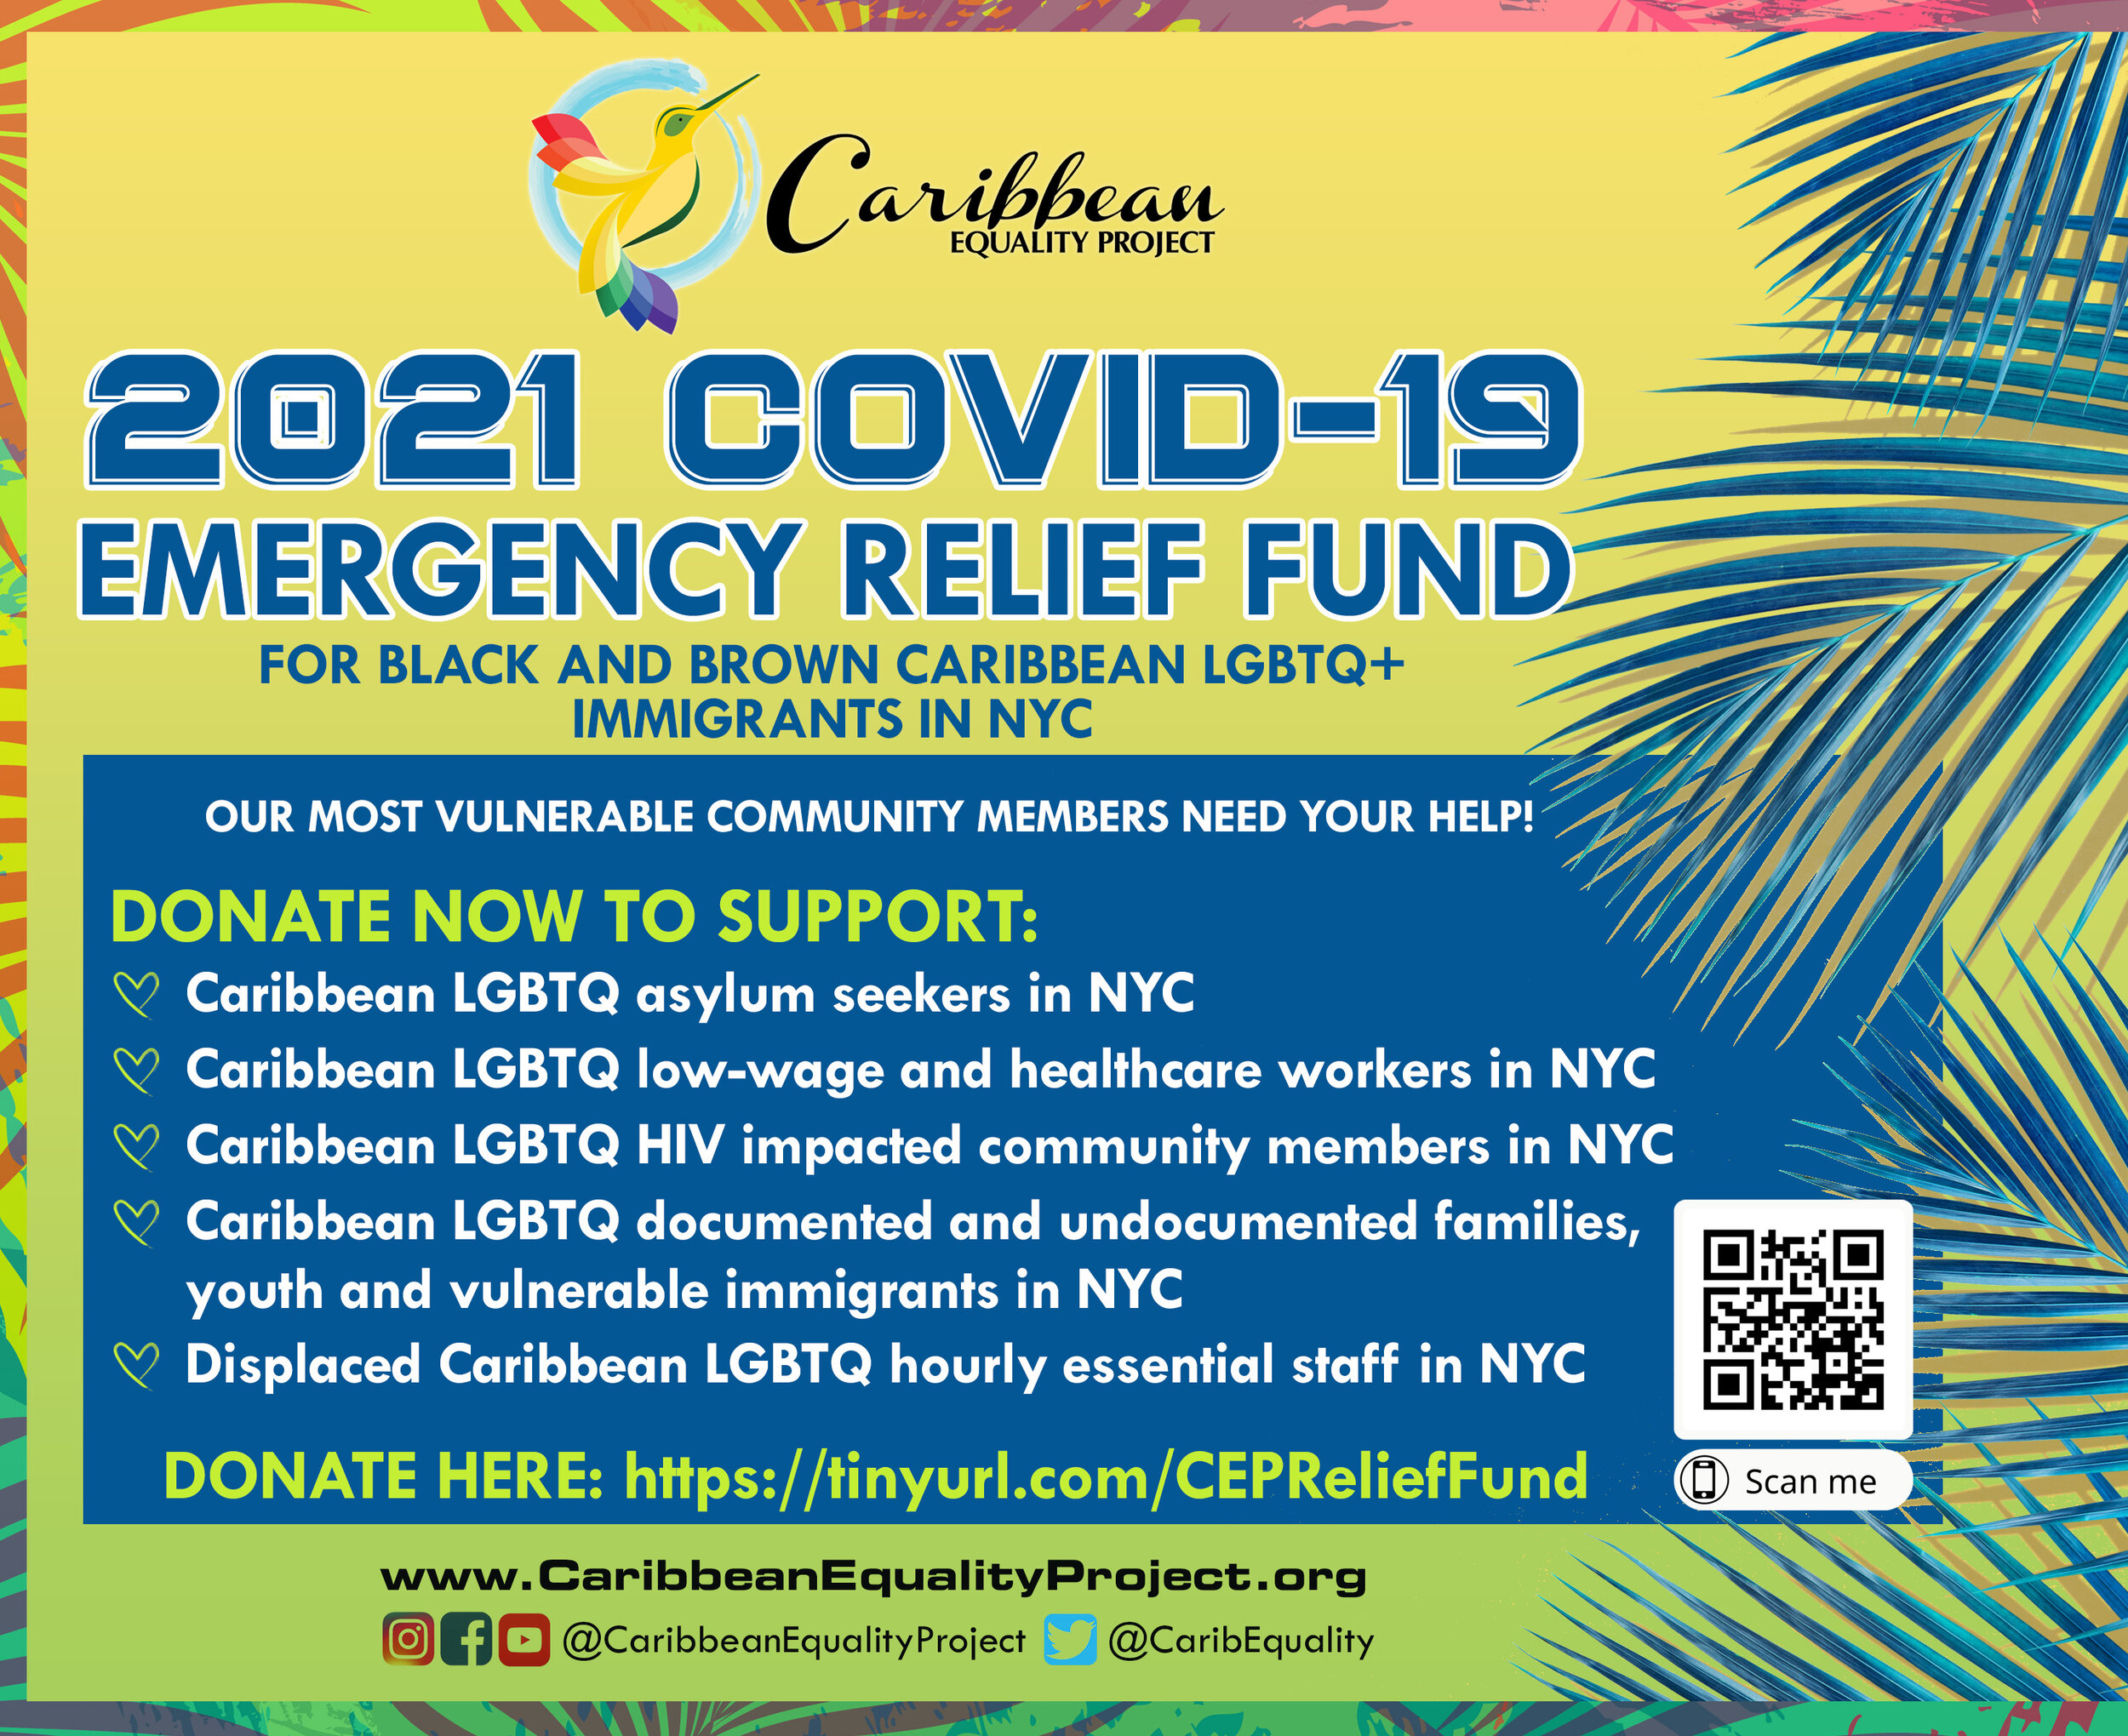 Donate here to our COVID-19 Emergency Relief Fund